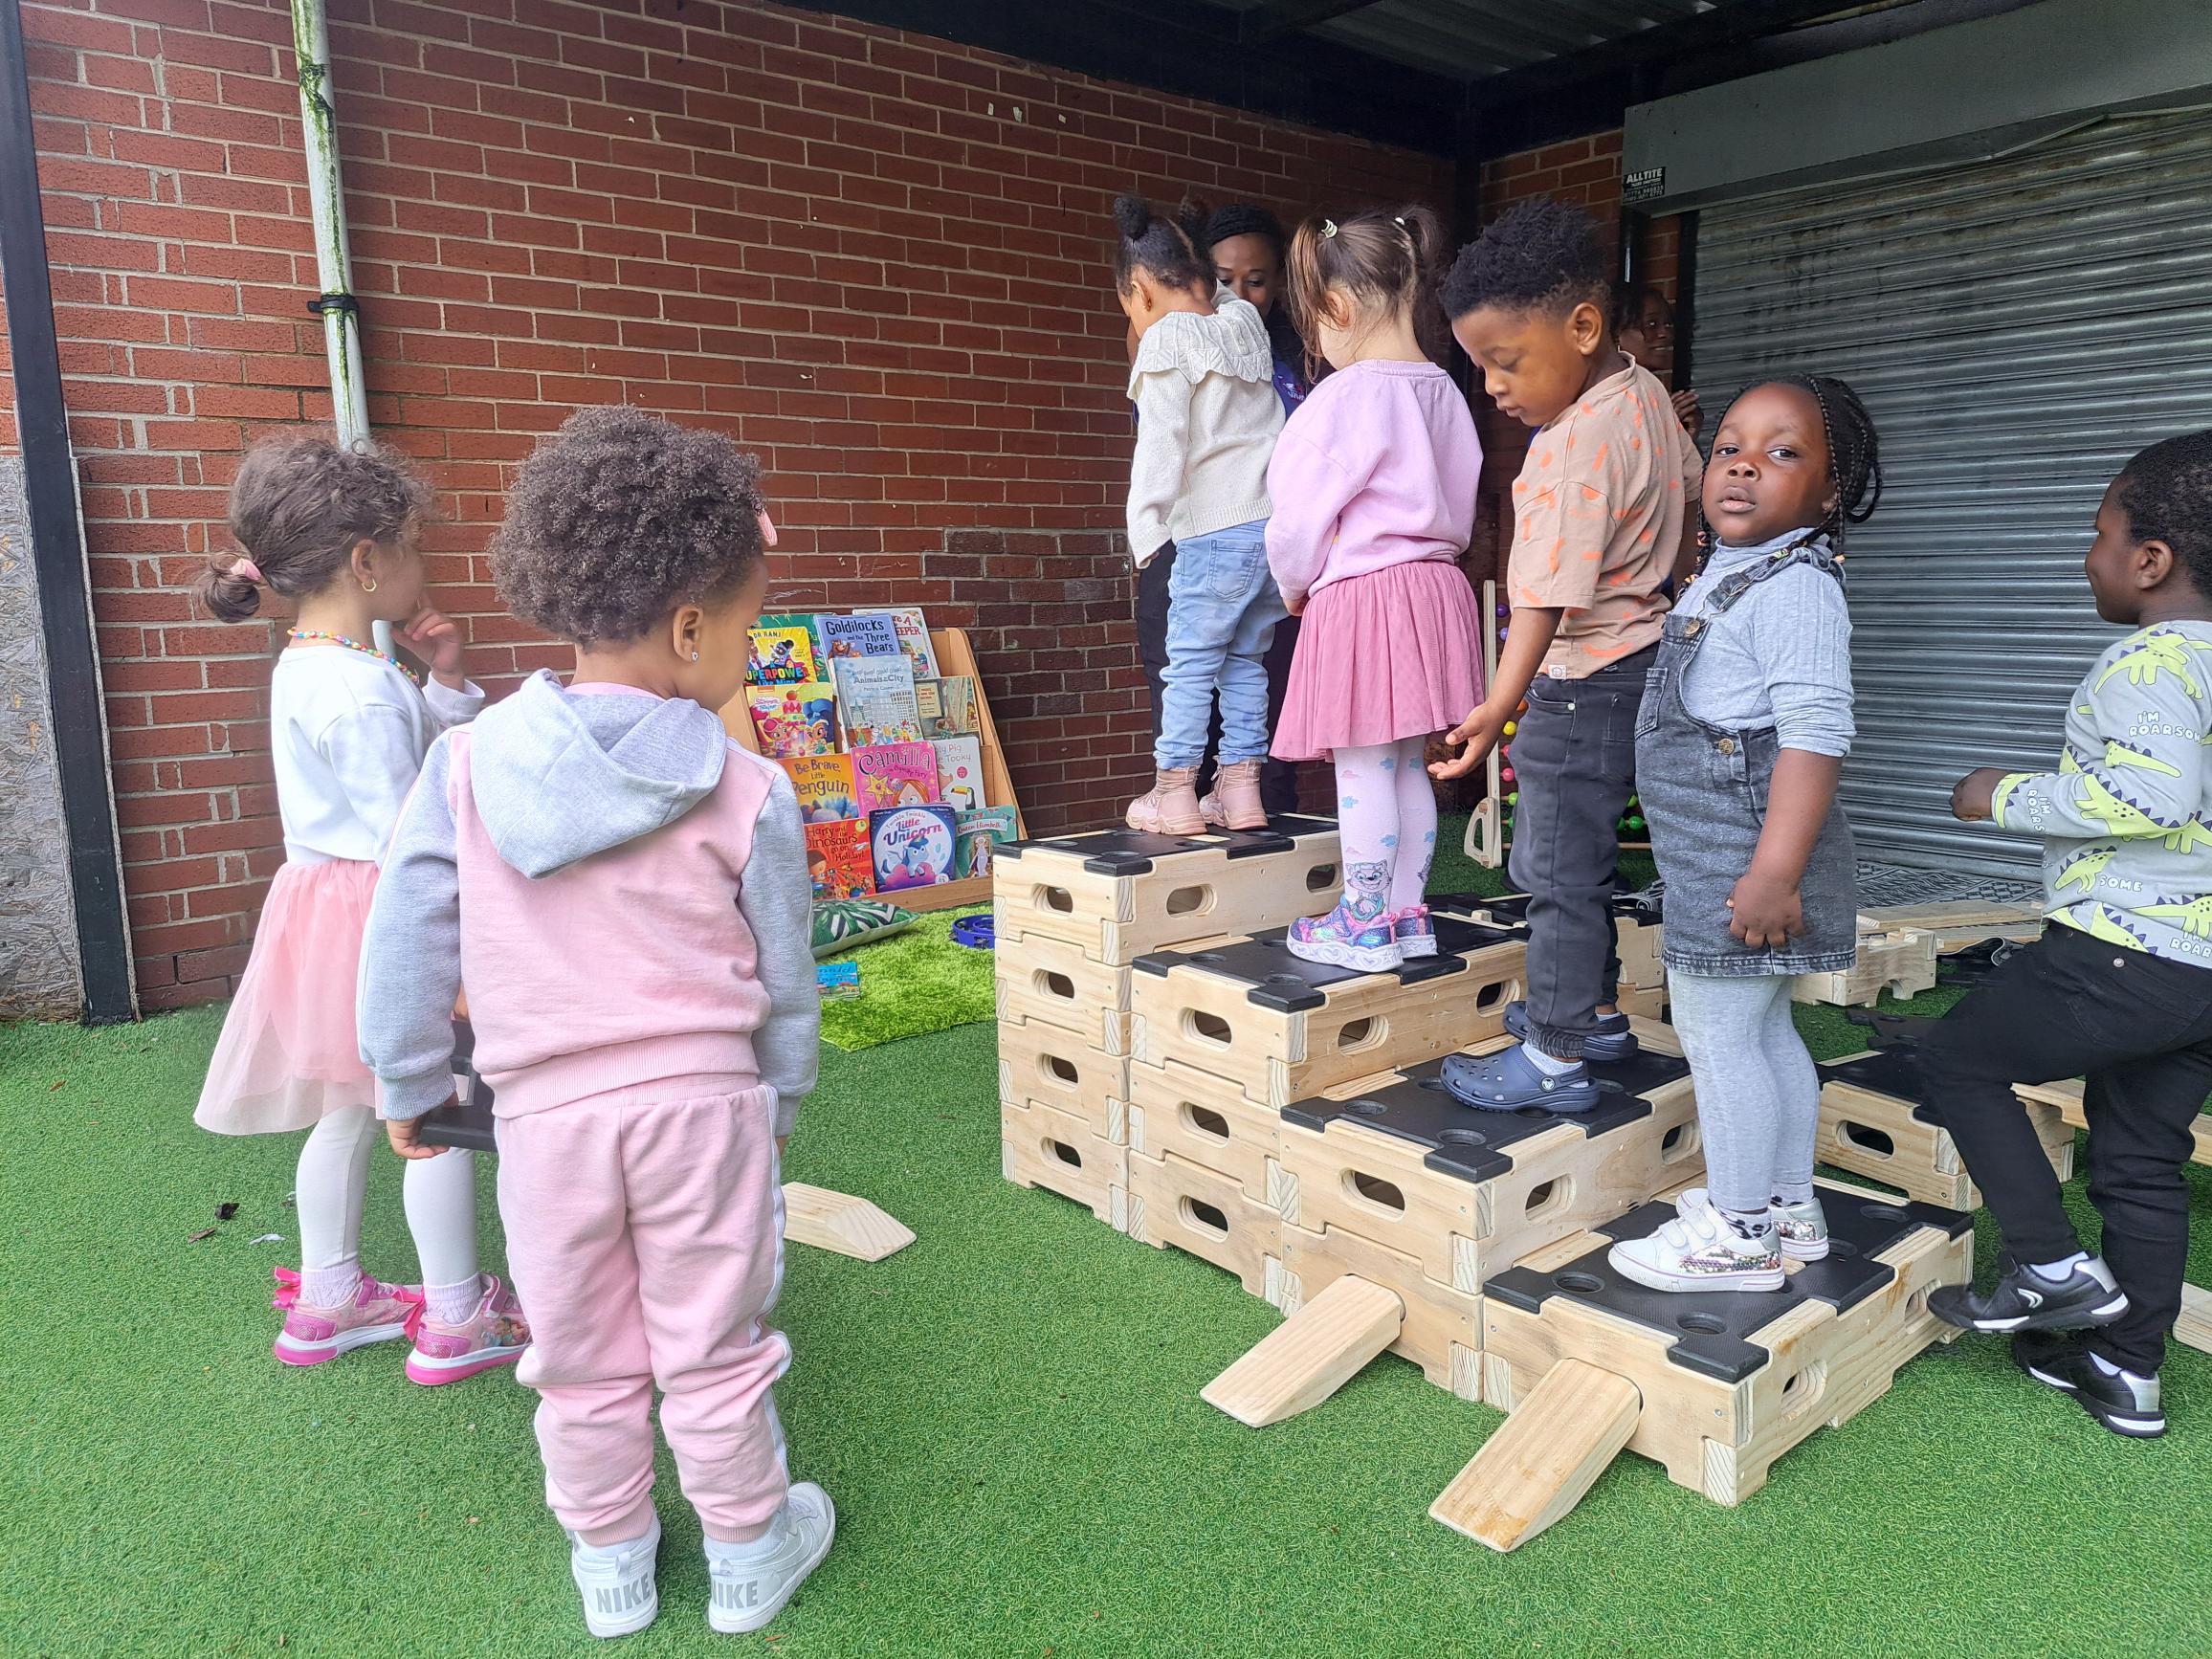 Wooden blocks are stacked on top of each other to create a staircase, with 4 children stood on each step. Each step is one higher than before, creating an ascending order.